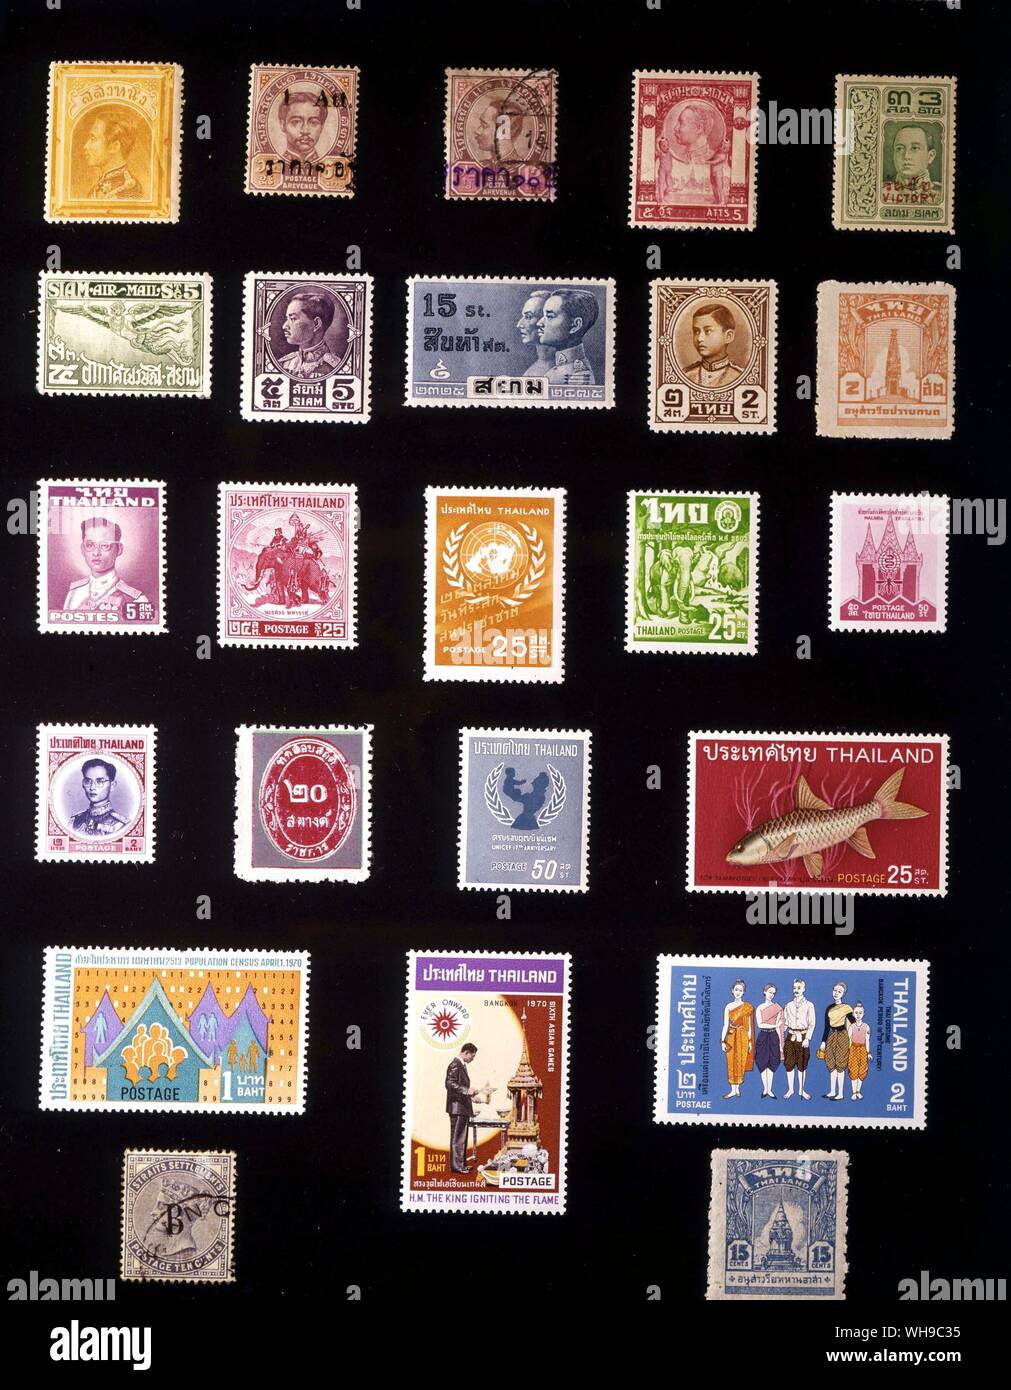 ASIA - THAILAND: (left to right) 1. 1 salung, 1883, 2. 1 att, 1894, 3. 10 atts, 1902, 4. 5 atts, 1905, 5. 3 satangs, 1918, 6. 5 satangs, 1925, 7. 5 satangs, 1928, 8. 15 satangs, 1932, 9. 2 satangs, 1941, 10. 2 satangs, 1943, 11. 5 satangs, 1951, 12. 25 satangs, 1955, 13. 25 satangs, 1957, 14. 25 satangs, 1960, 15. 50 satangs, 1962, 16.2 bahts, 1963, 17. 20 satangs, 1963, 17. 20 satangs, 1963, 18. 50 satangs, 1964, 19. 25 satangs, 1968, 20. 1 baht, 1970, 21. 1 baht, 1970, 22. 2 bahts, 1971, 23. British Post Office in Bangkok, 10 cents, 1882 Stock Photo